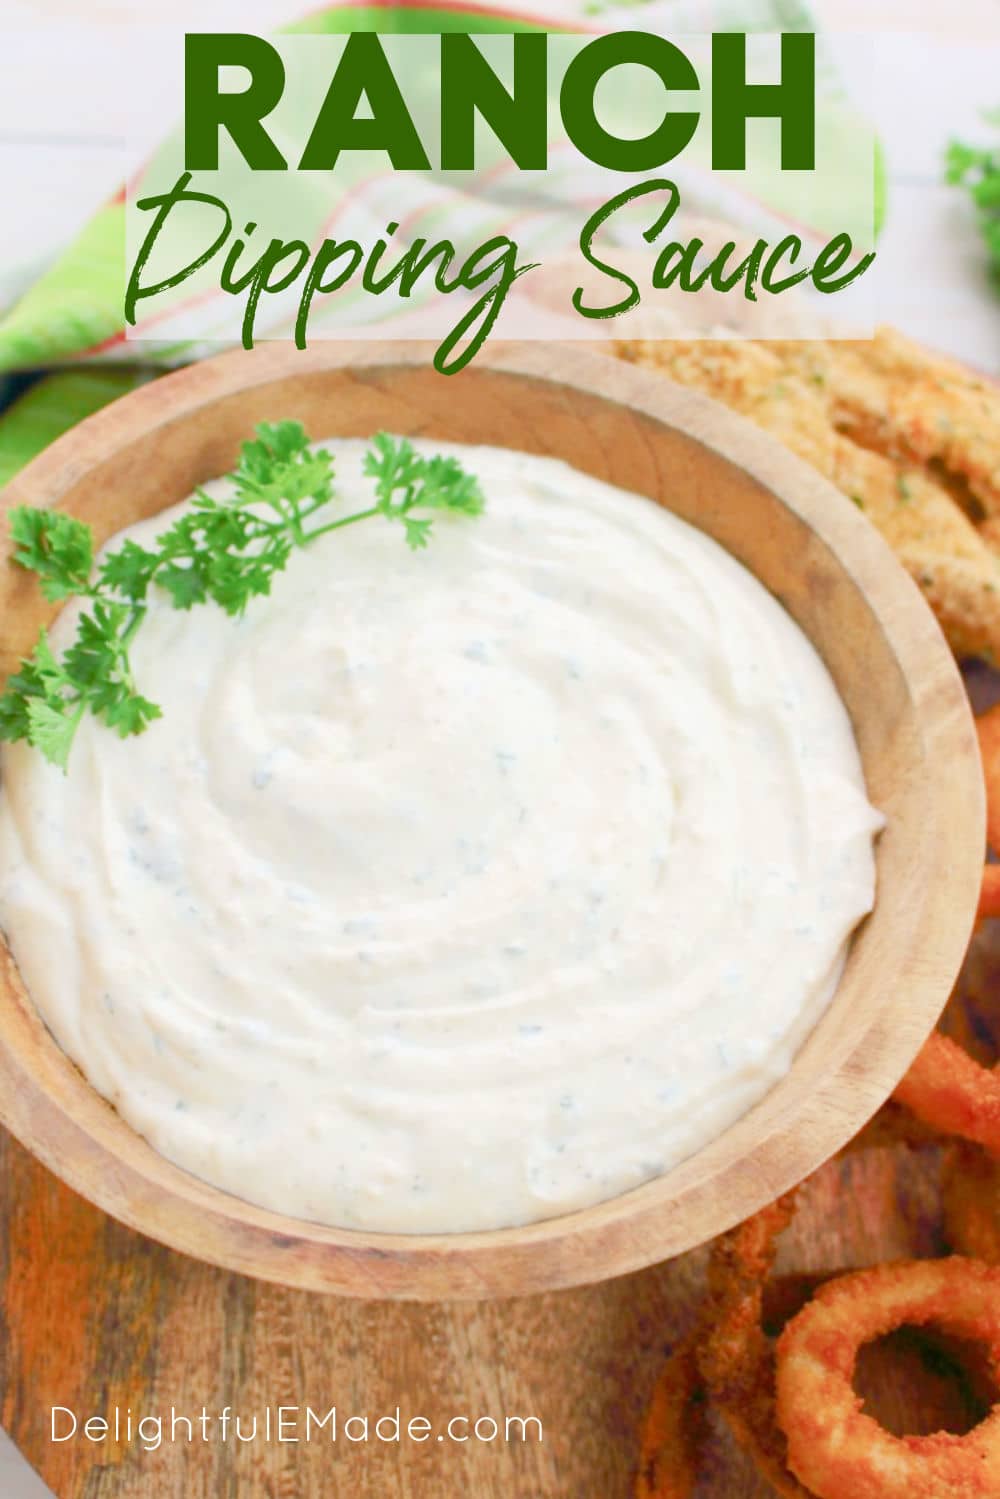 Parmesan Ranch Dipping Sauce | The BEST Ranch Dipping Sauce recipe!